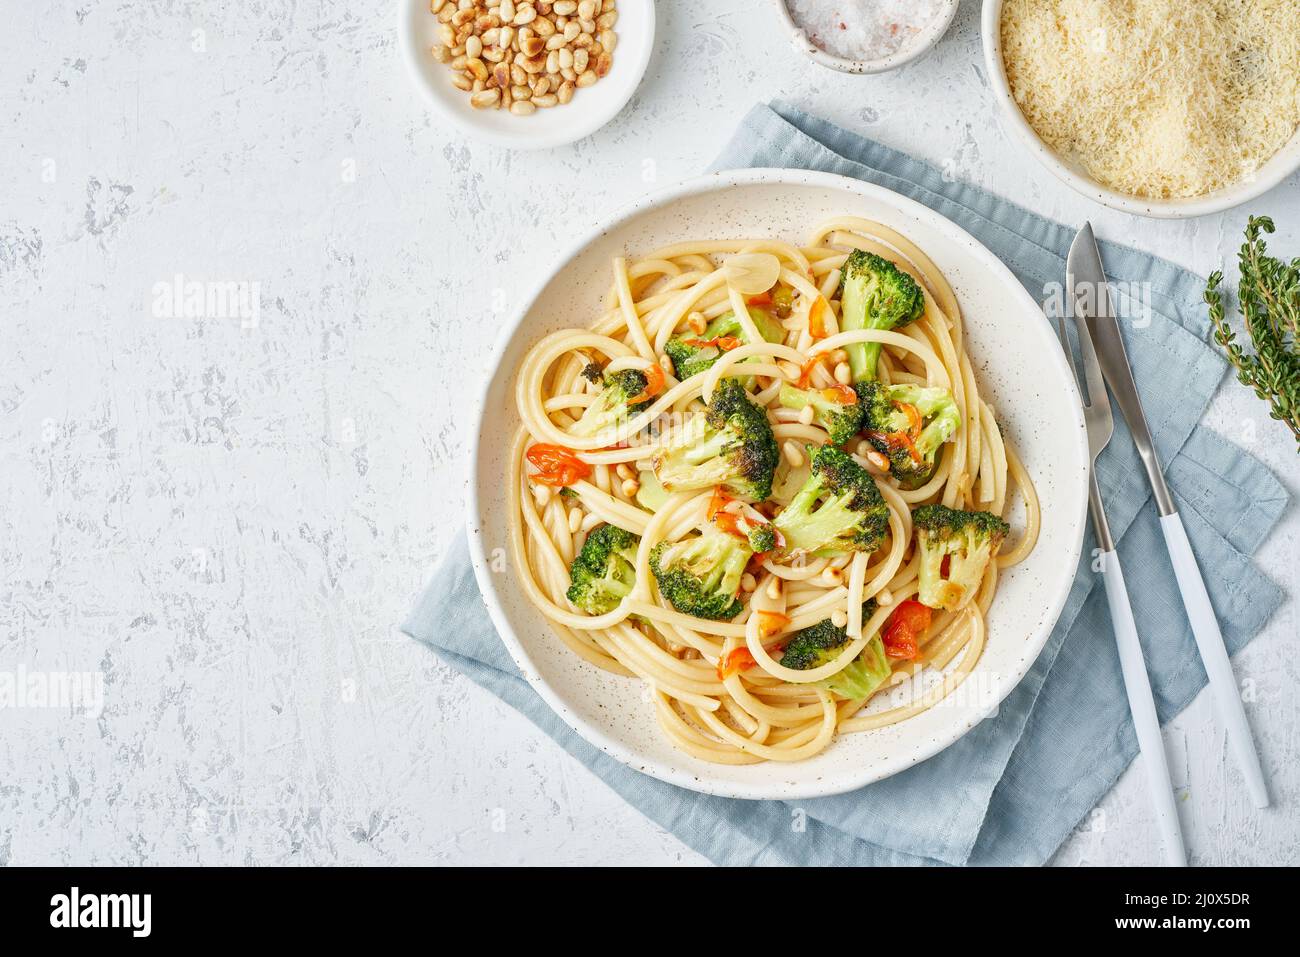 Spaghetti pasta with broccoli, bucatini with pine nuts. Food for vegans, vegetarians Stock Photo